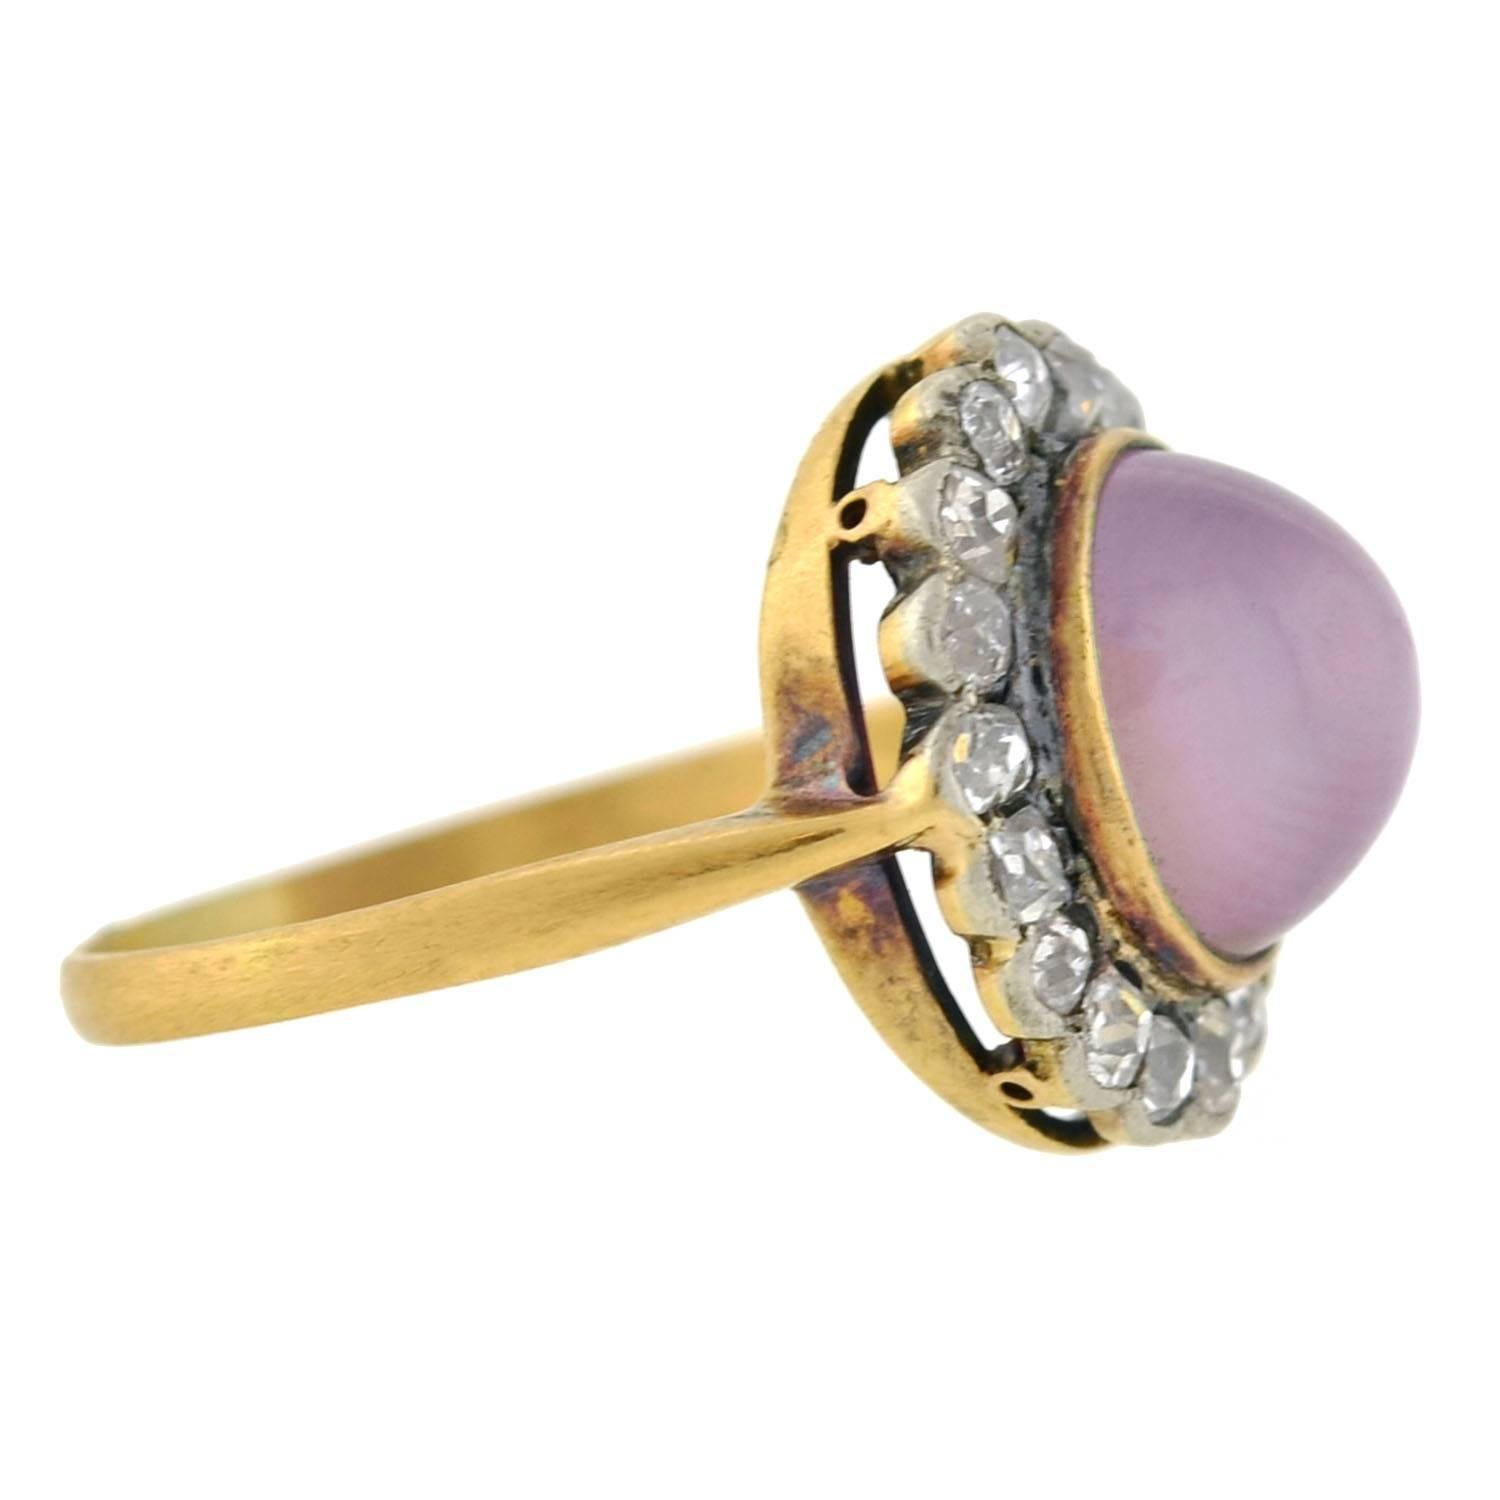 A beautiful lavender star sapphire ring from the Victorian (ca1880) era! Crafted in 18kt gold and sterling silver, this gorgeous ring holds a luscious 4.50ct lavender star sapphire cabochon at the center. When turned in the light, the stone reveals